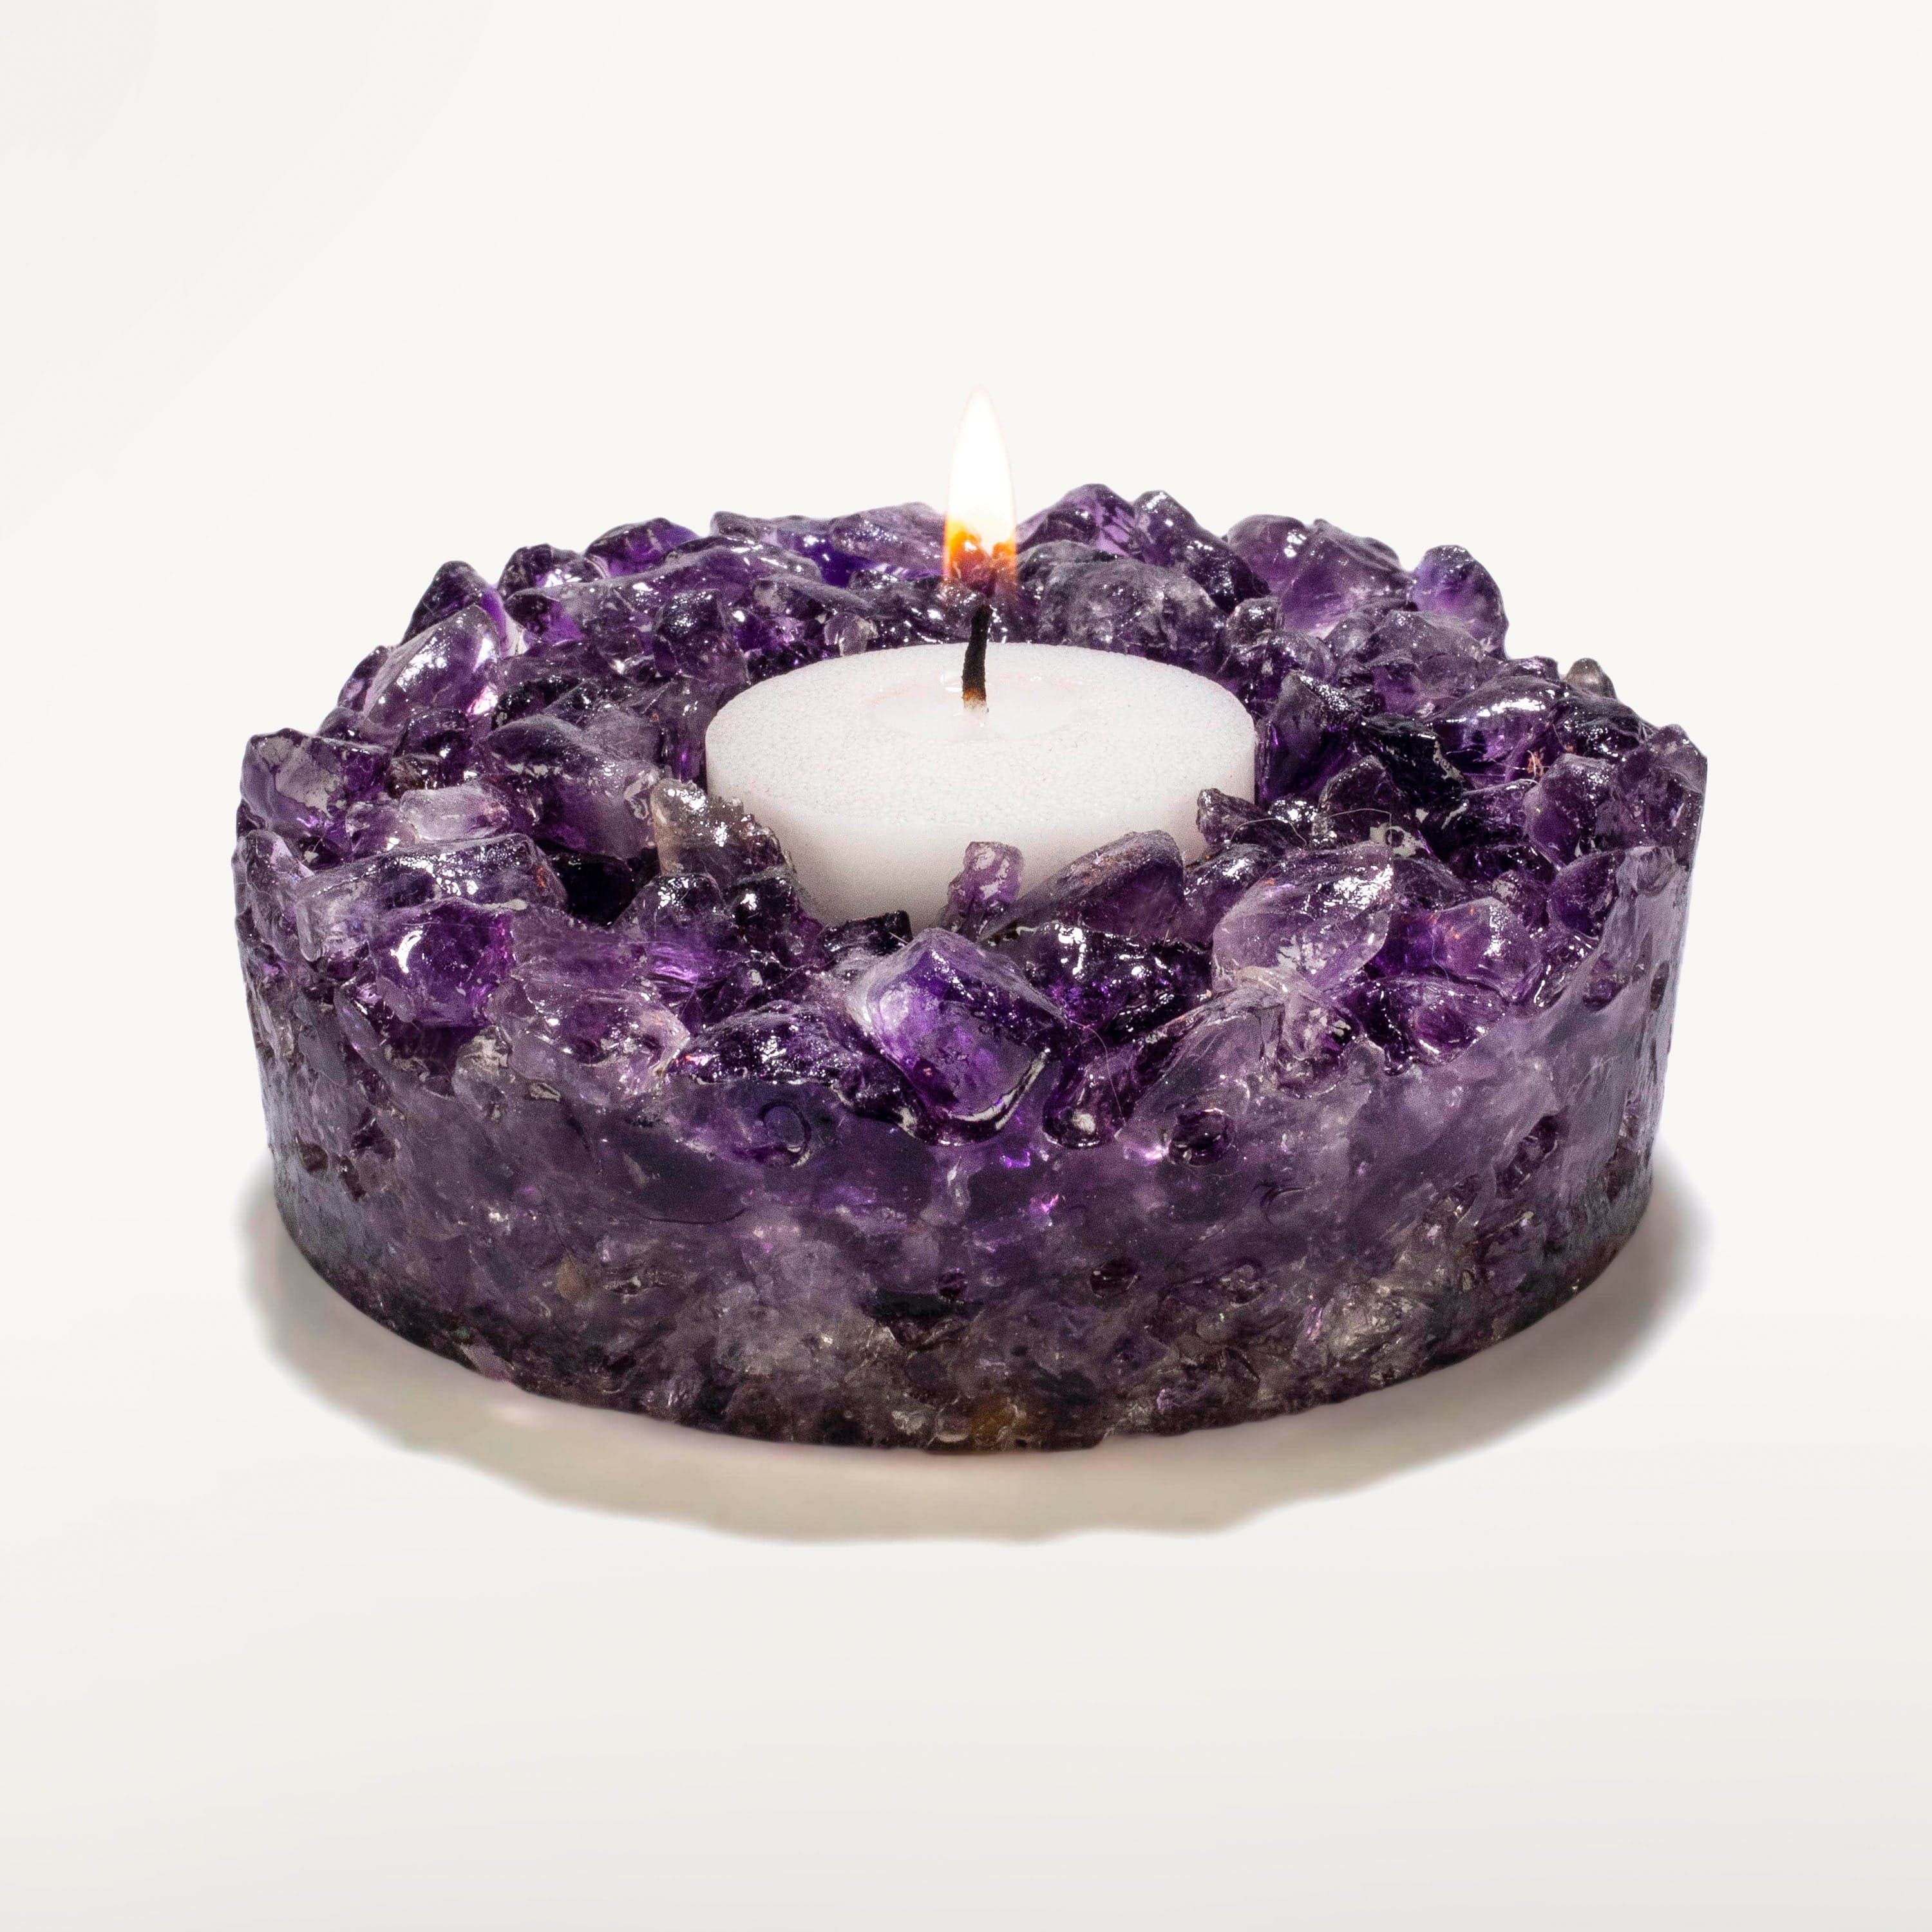 Kalifano Candle Holders Crushed Amethyst Tealight Candle Holder GCH-20